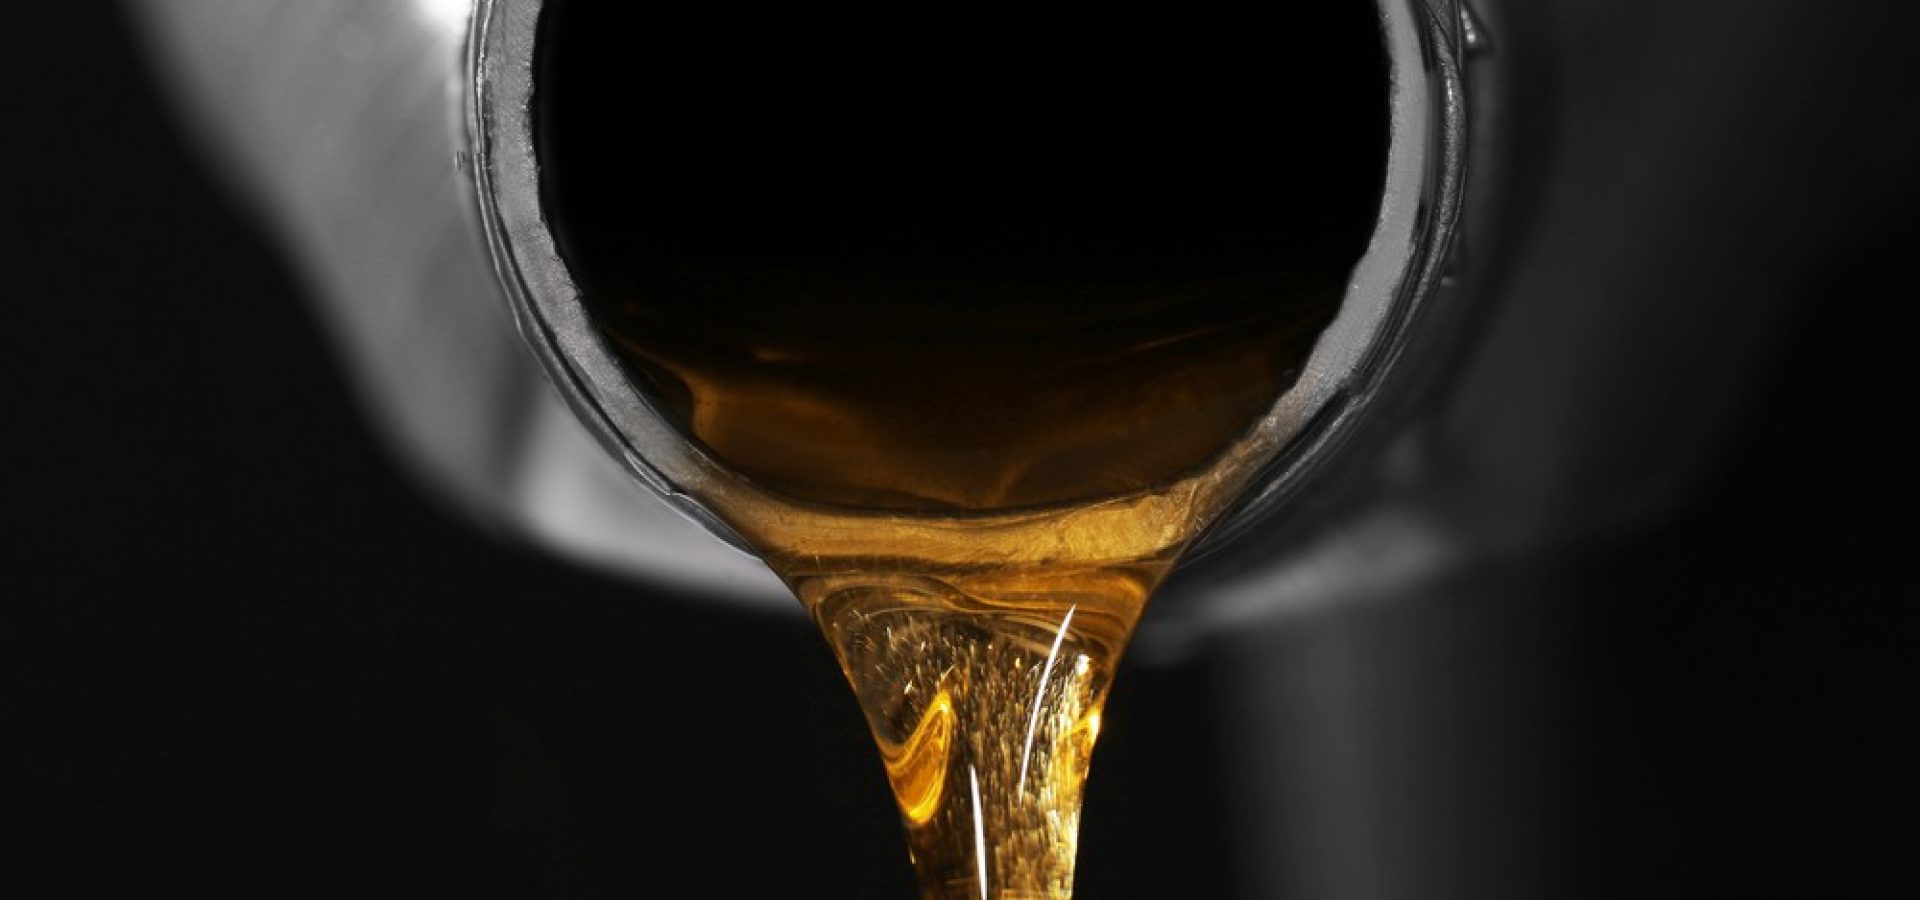 Wibest – Oil and petroleum: Oil poured out of a container.